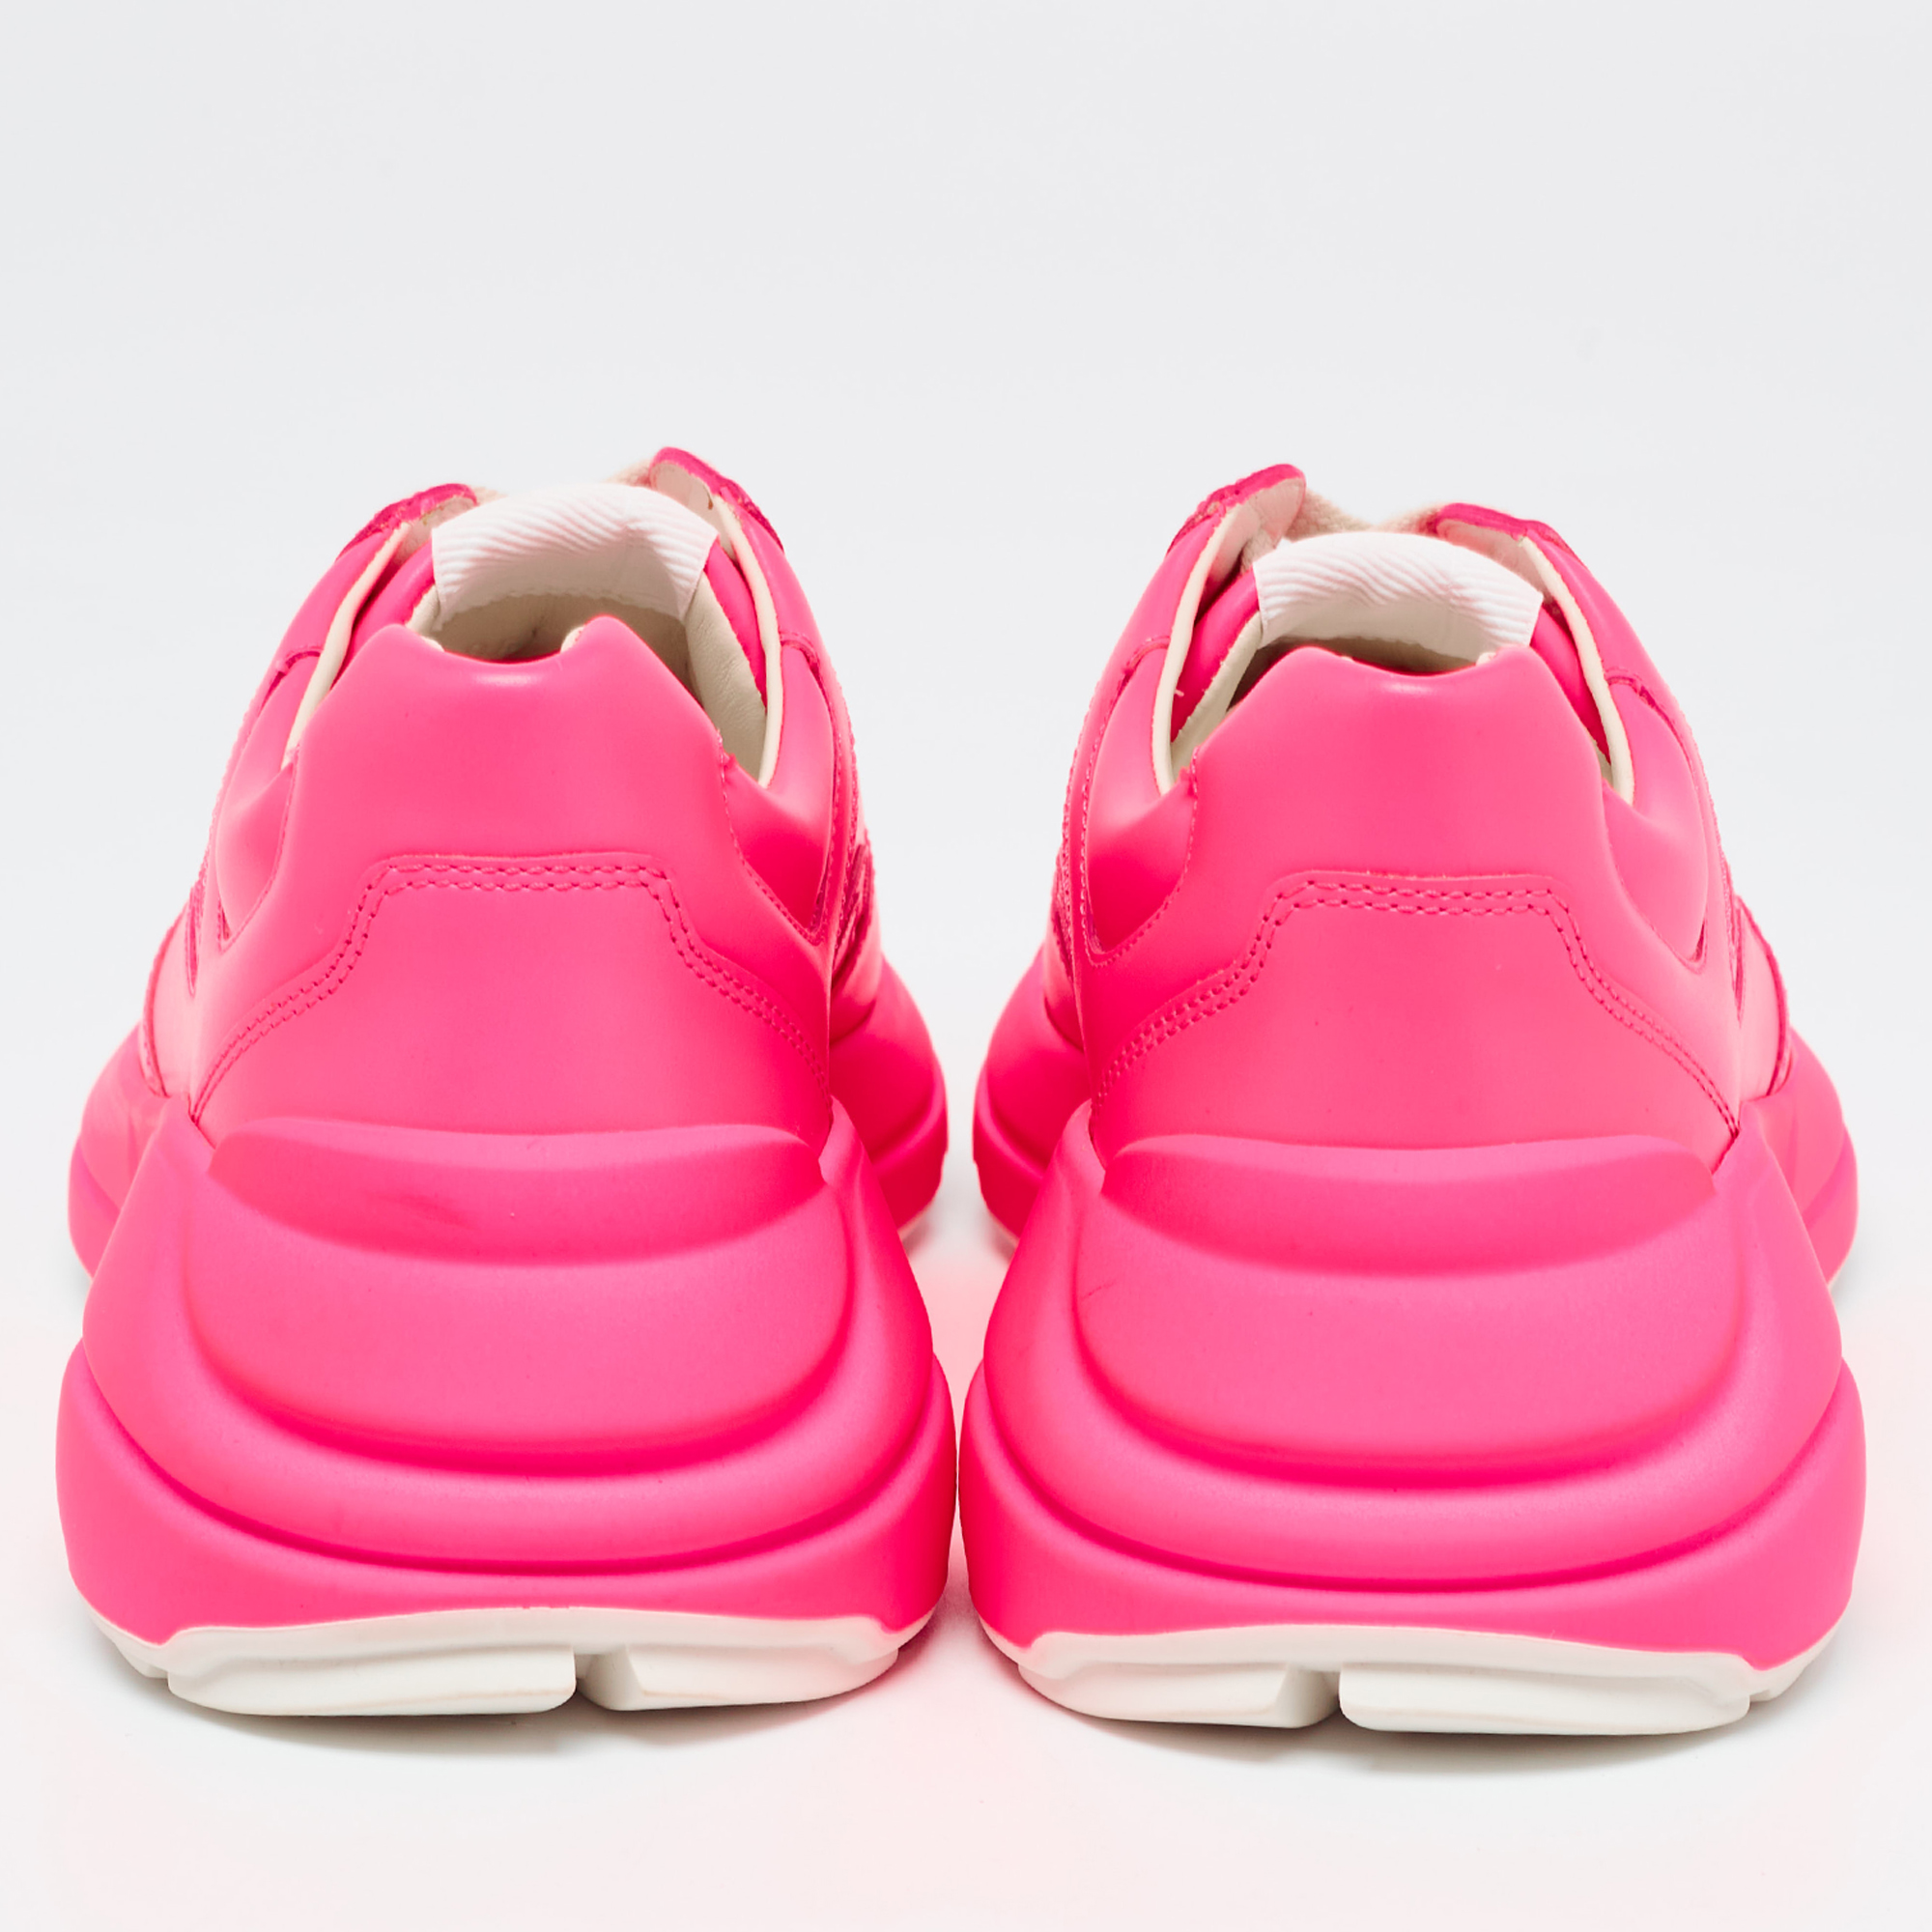 Gucci Neon Pink Leather Rhyton Sneakers Size 39